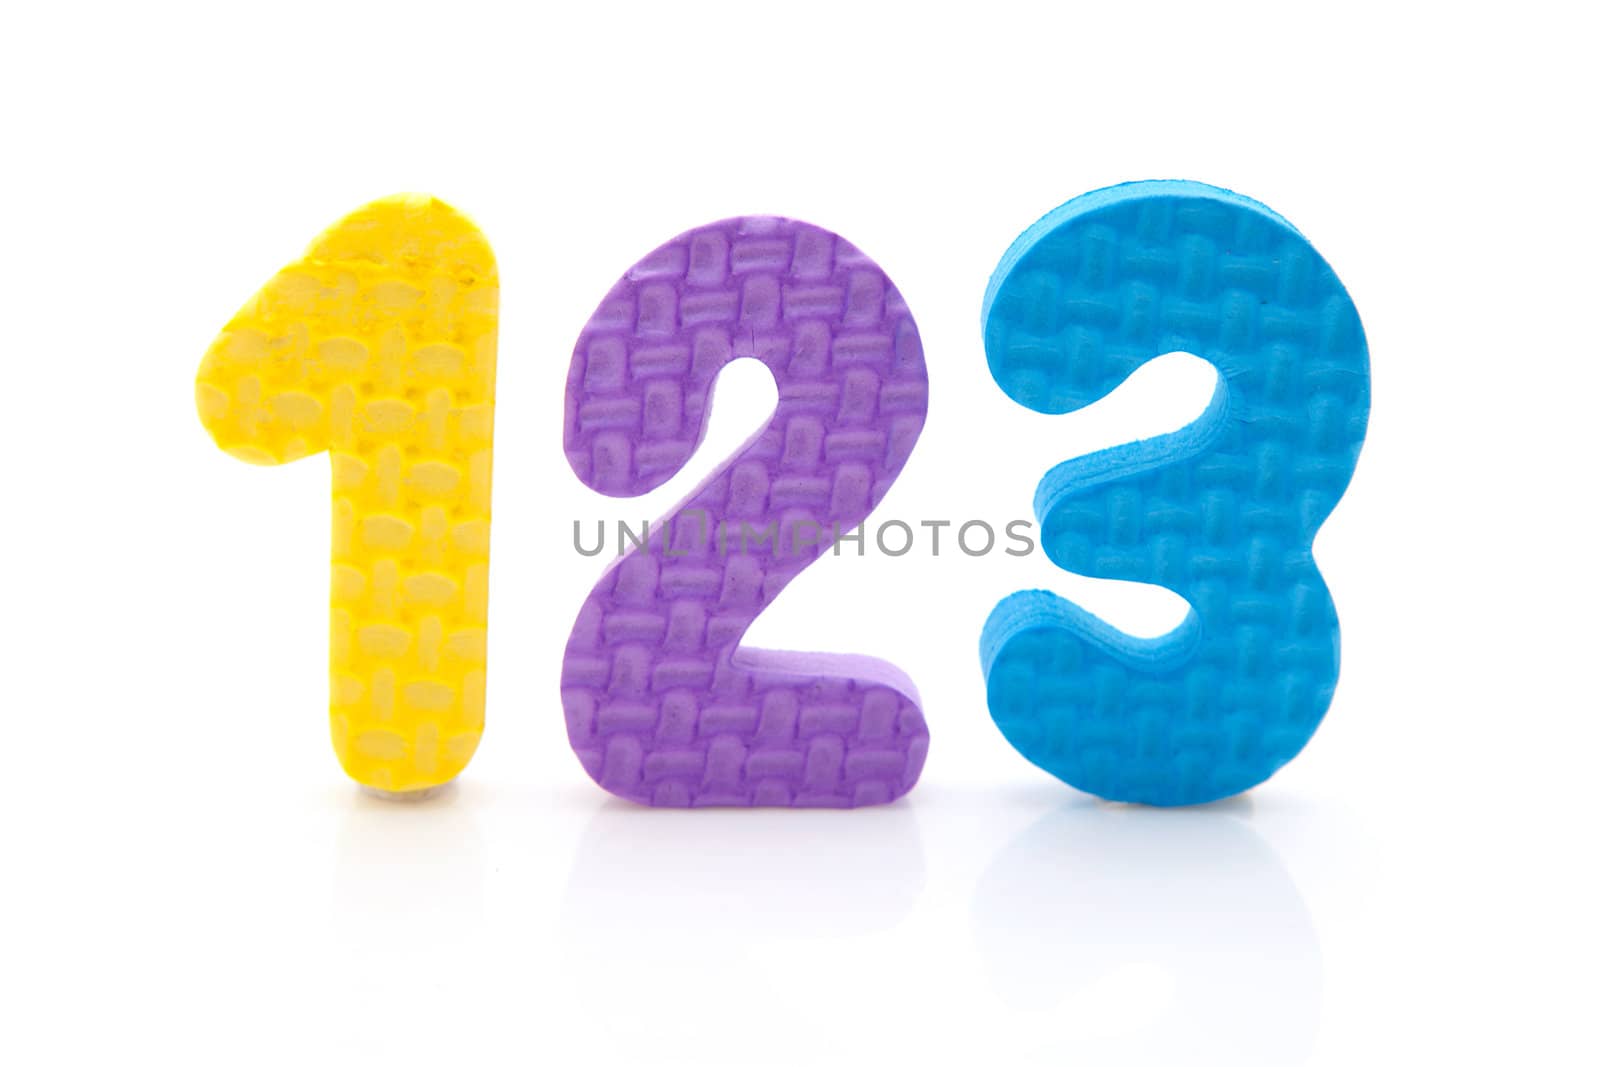 colorful foam figures 1 2 3 over white background